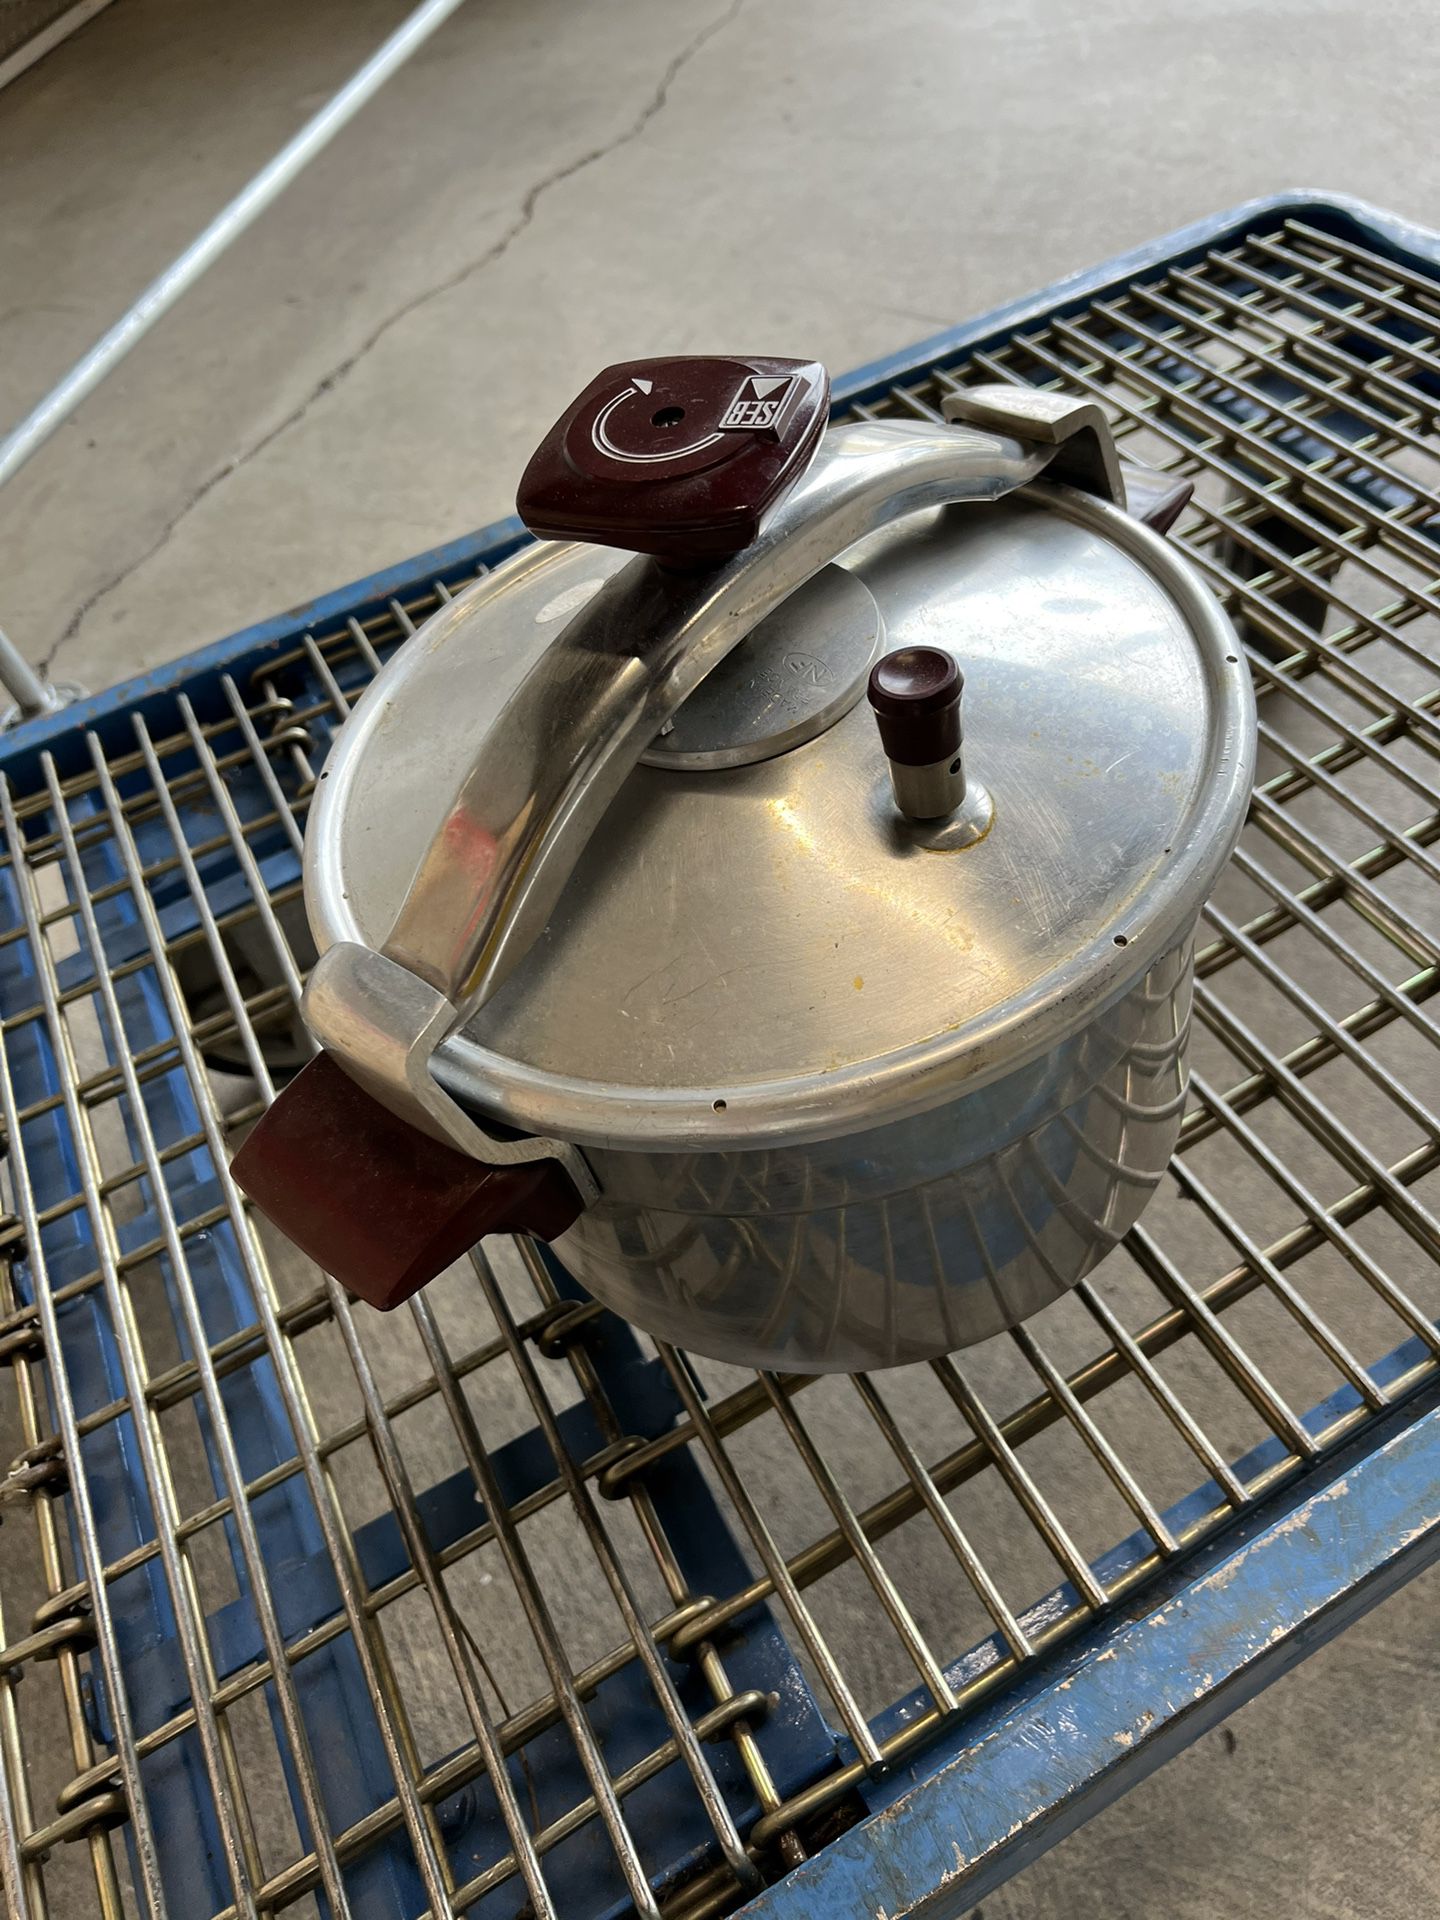 Cuisinart 8 qt. Brushed Stainless Pressure Cooker for Sale in Cottonwood,  AZ - OfferUp